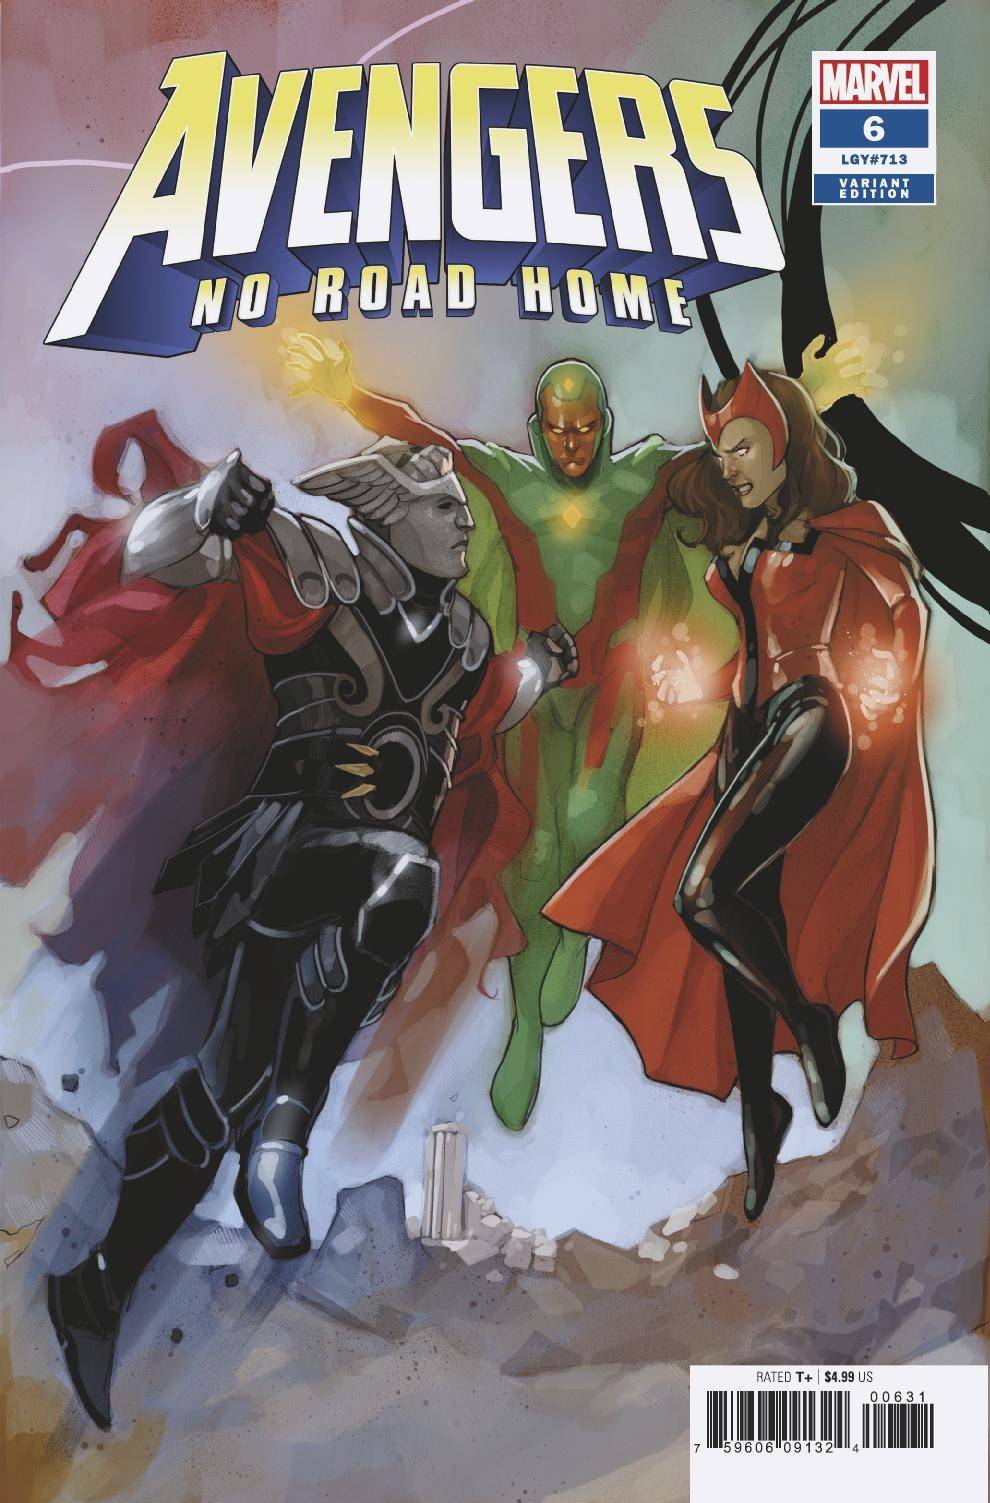 AVENGERS NO ROAD HOME #6 (OF 10) NOTO CONNECTING VAR 03/20/19